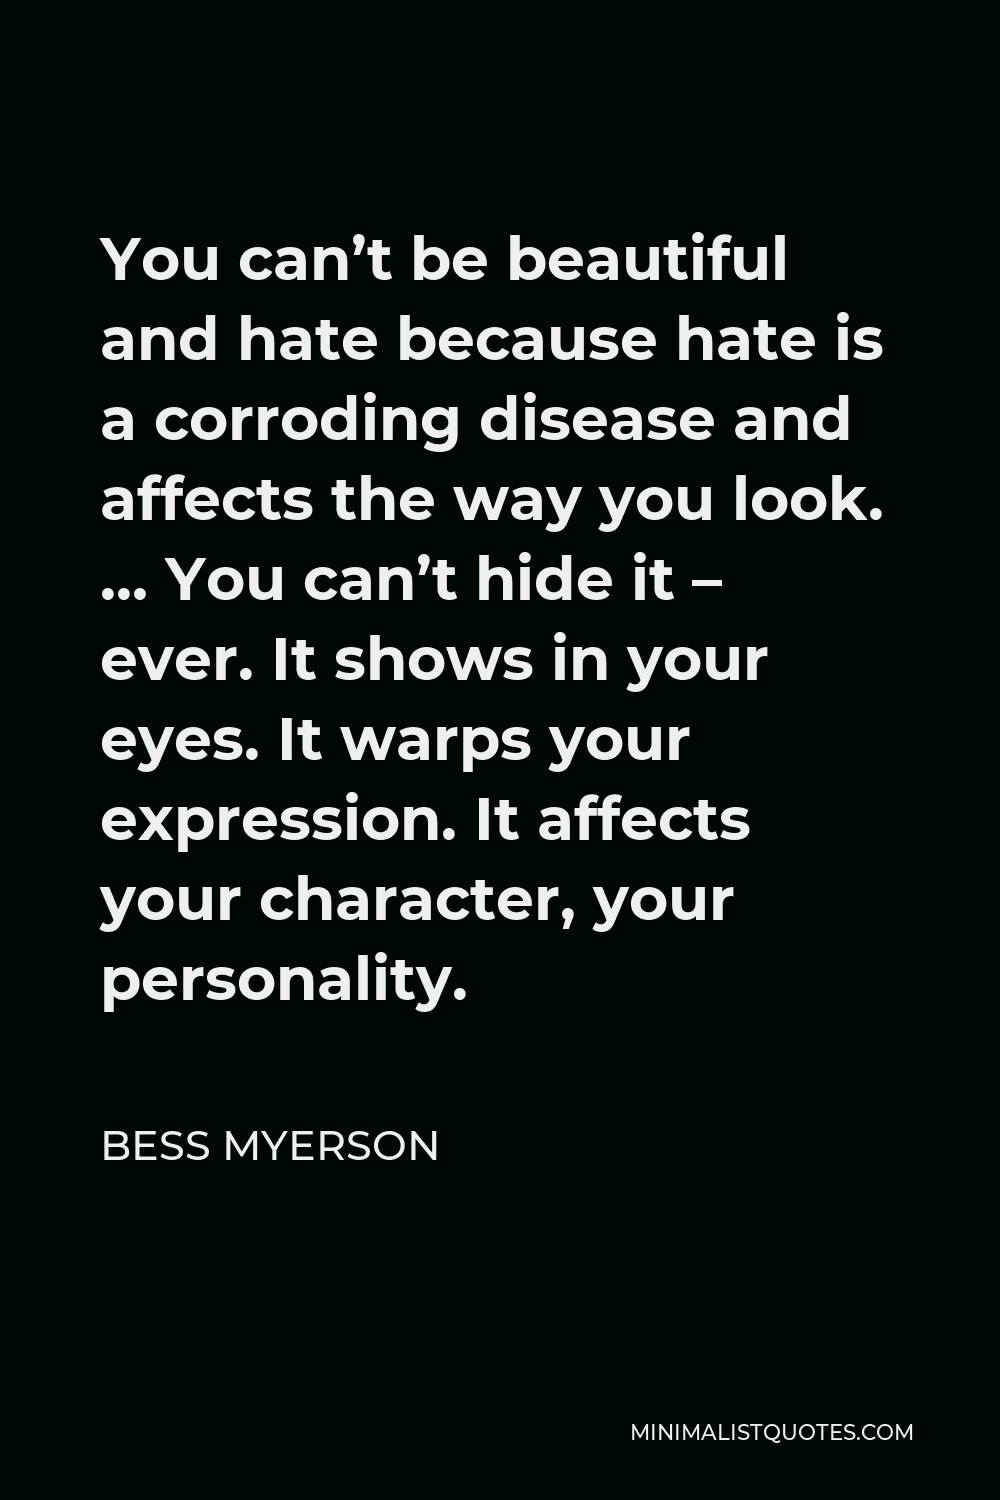 Bess Myerson Quote - You can’t be beautiful and hate because hate is a corroding disease and affects the way you look. … You can’t hide it – ever. It shows in your eyes. It warps your expression. It affects your character, your personality.